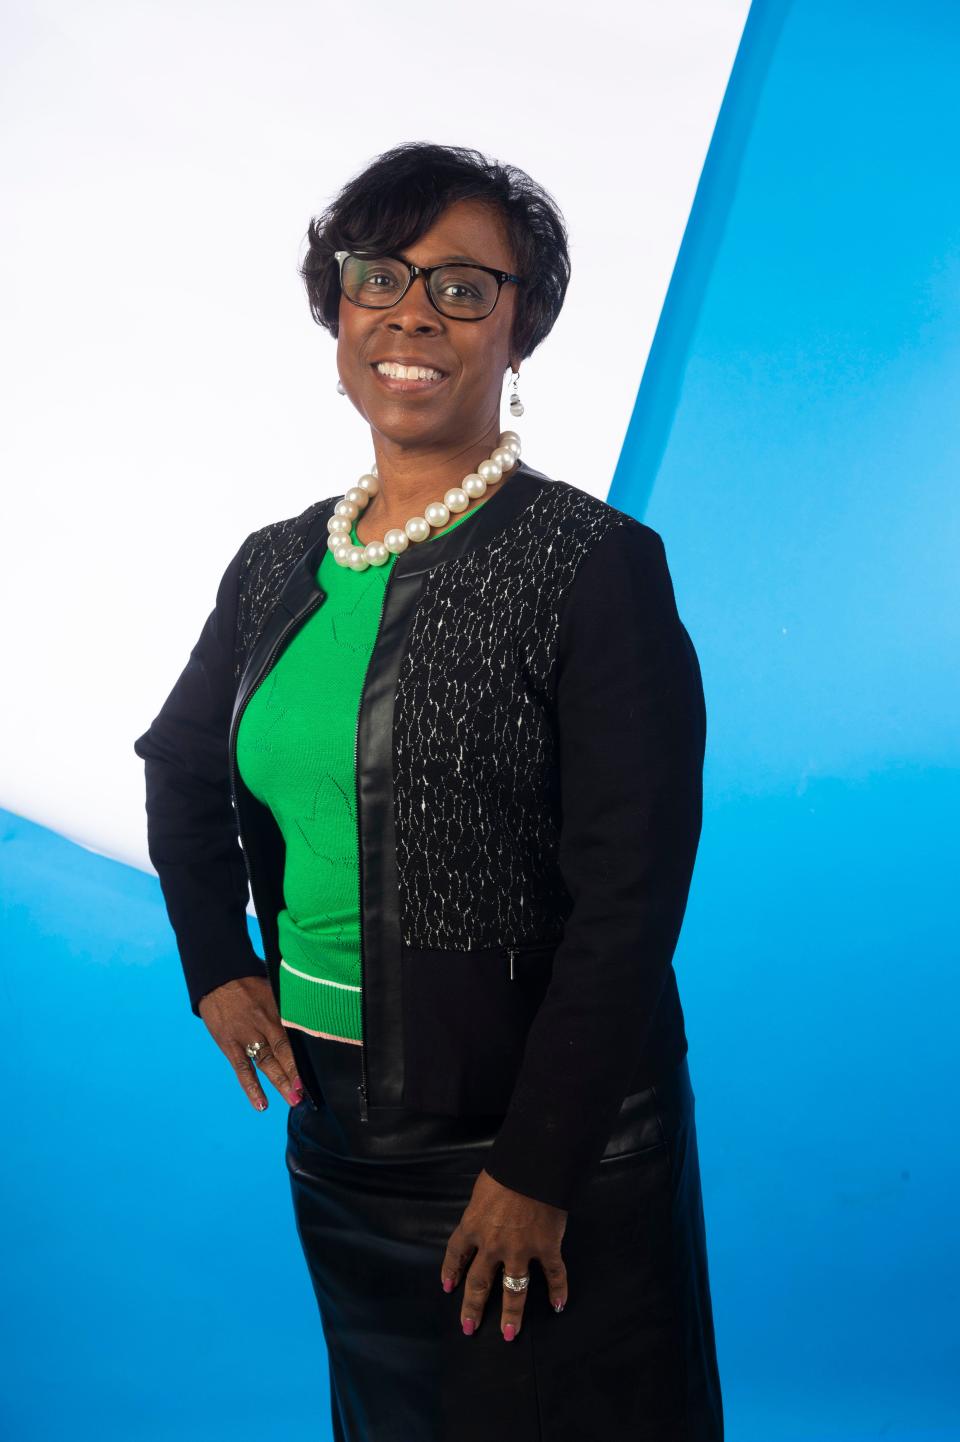 Cynthia J. Finch, Executive Director of New Direction Health Care Solutions, Inc., photographed in the Knox News photo studio in Knoxville, Tenn. on Thursday, Feb. 24, 2022.